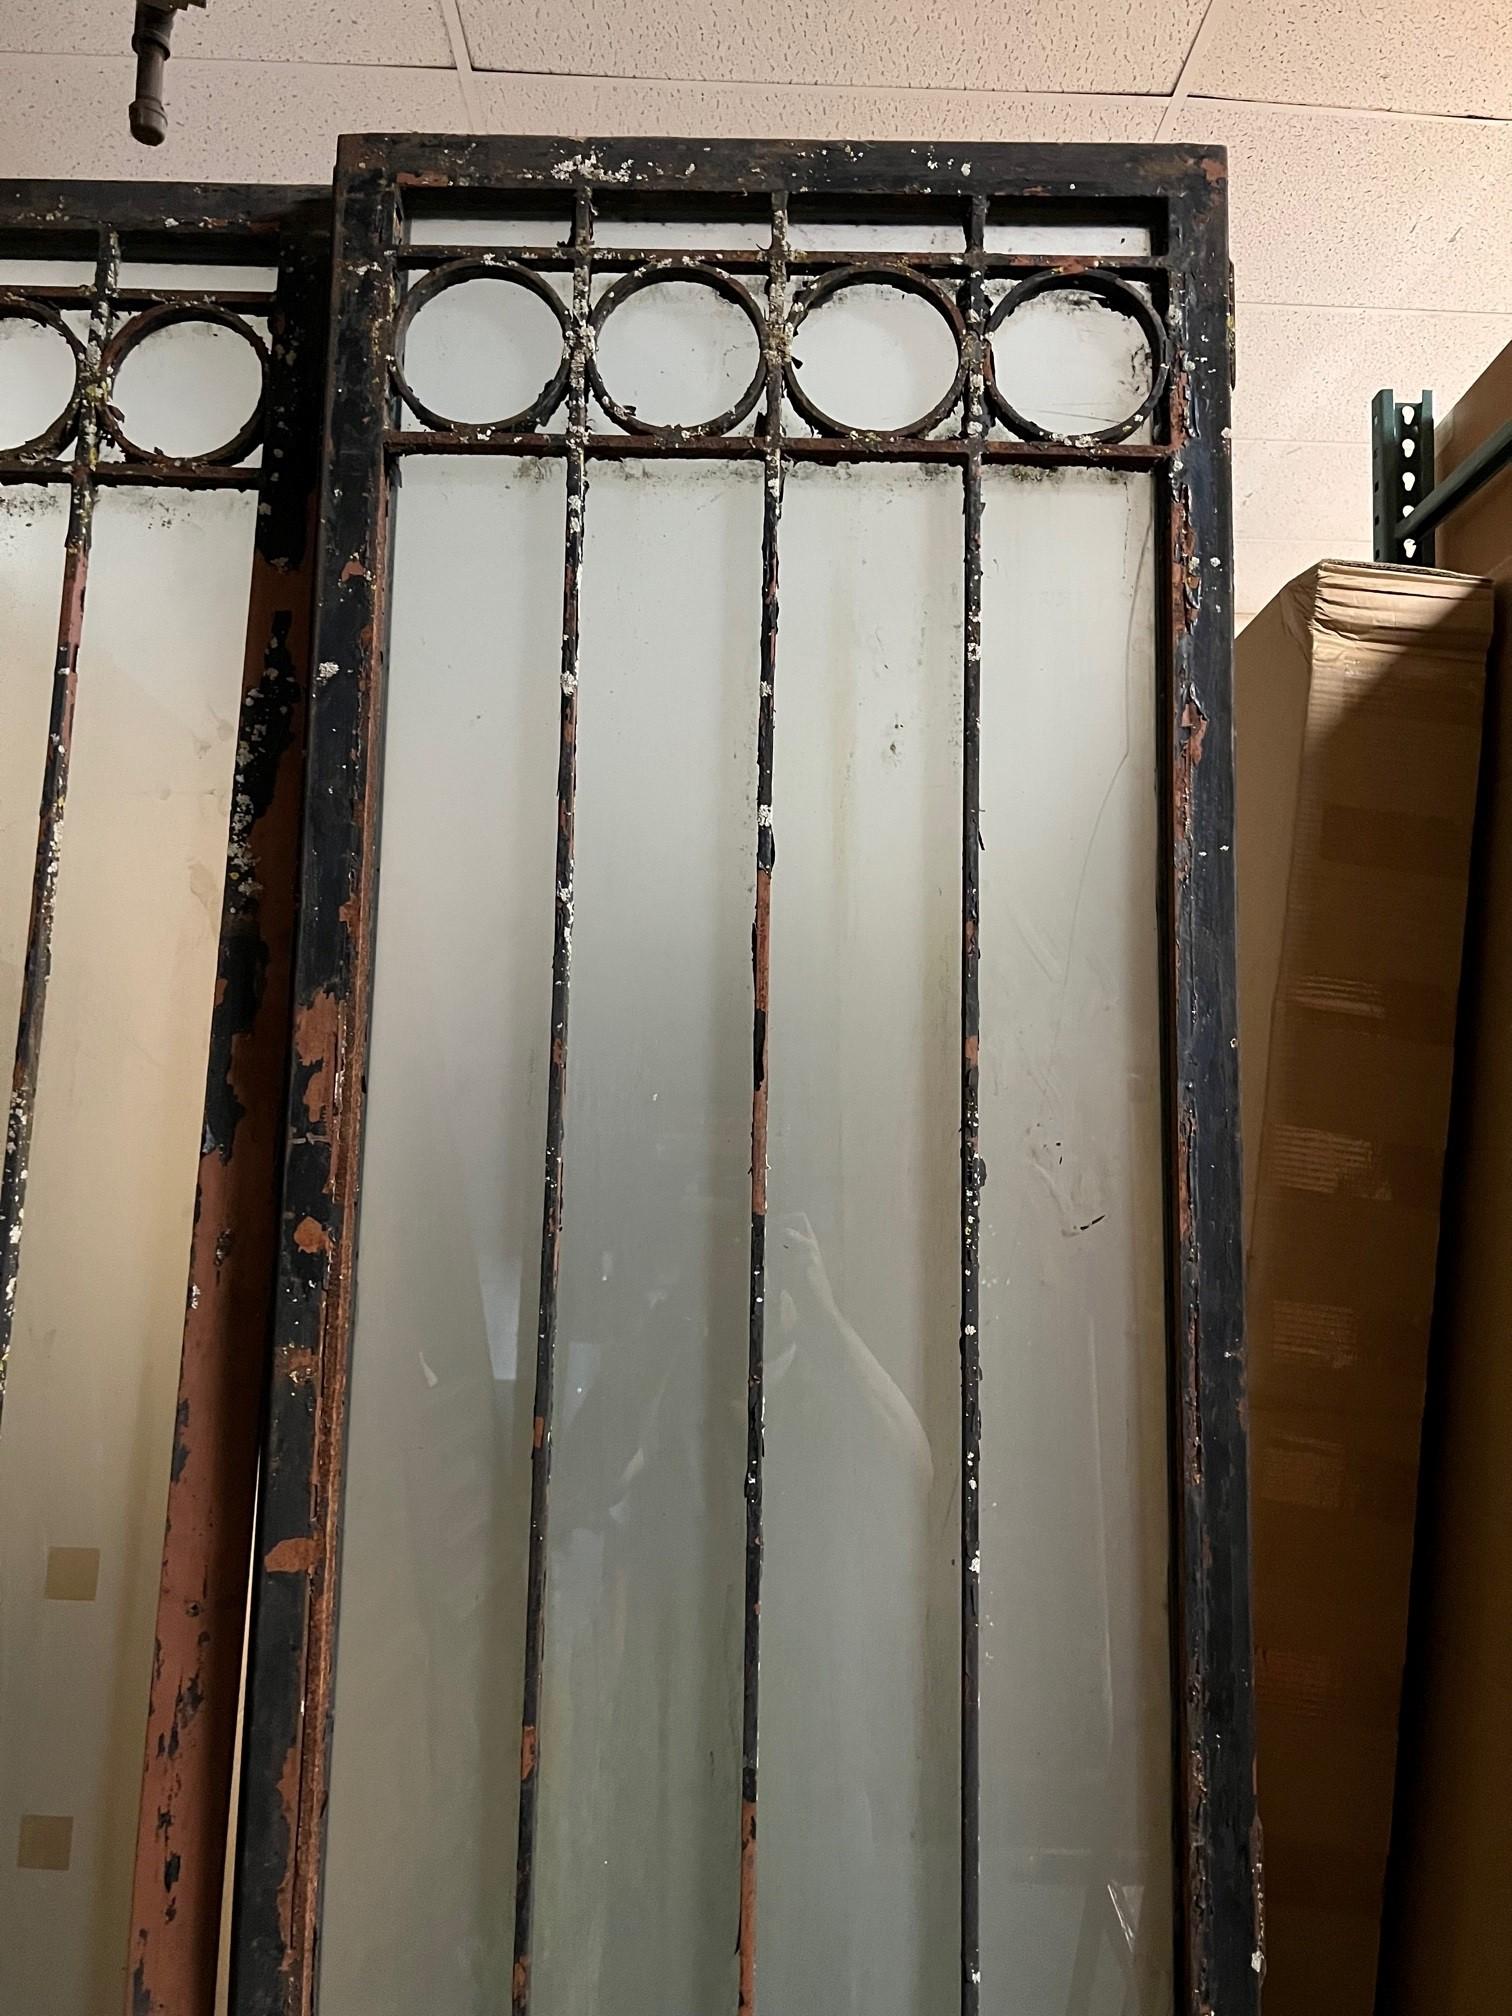 Pair of Tall Vintage Iron Doors with Frosted Glass  In Fair Condition For Sale In Stamford, CT